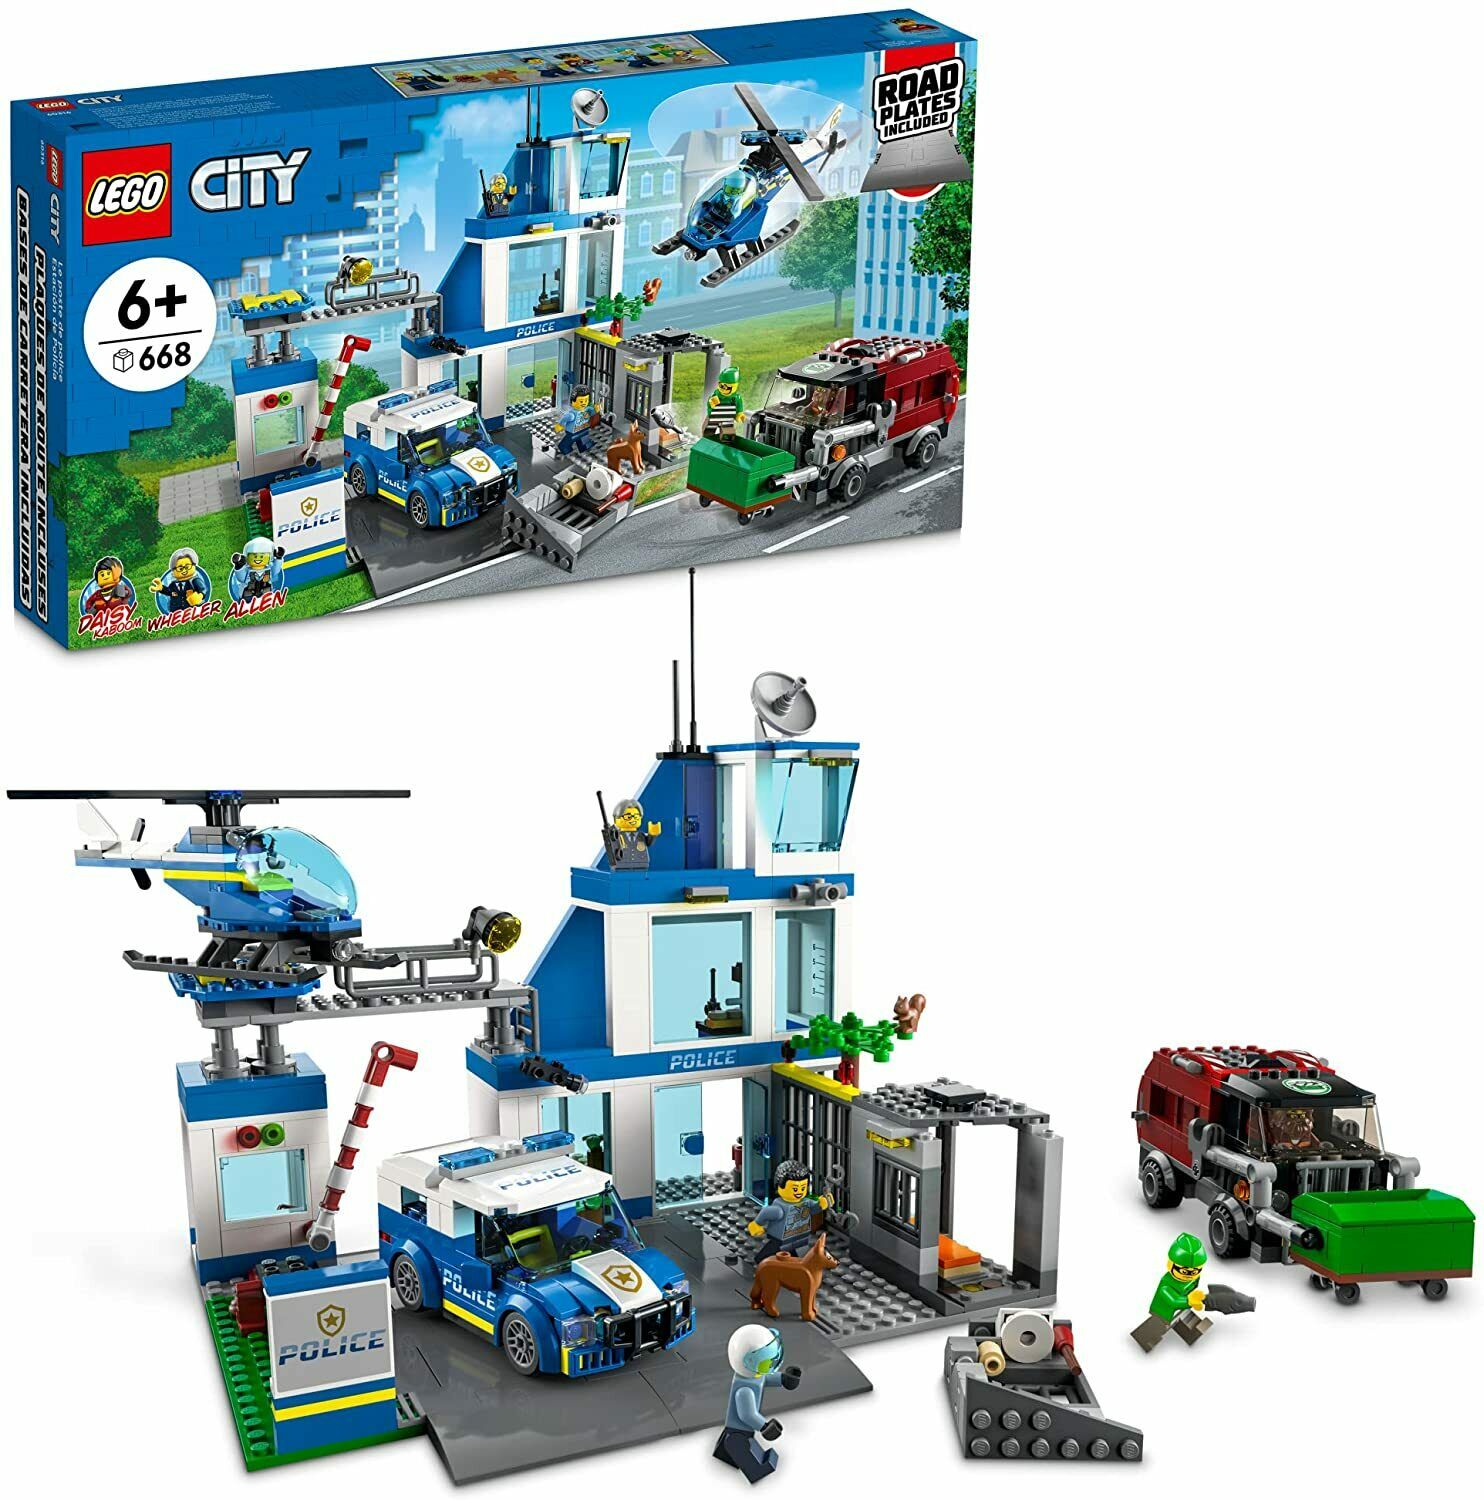 LEGO City Police Station Building Kit - 668 Pieces